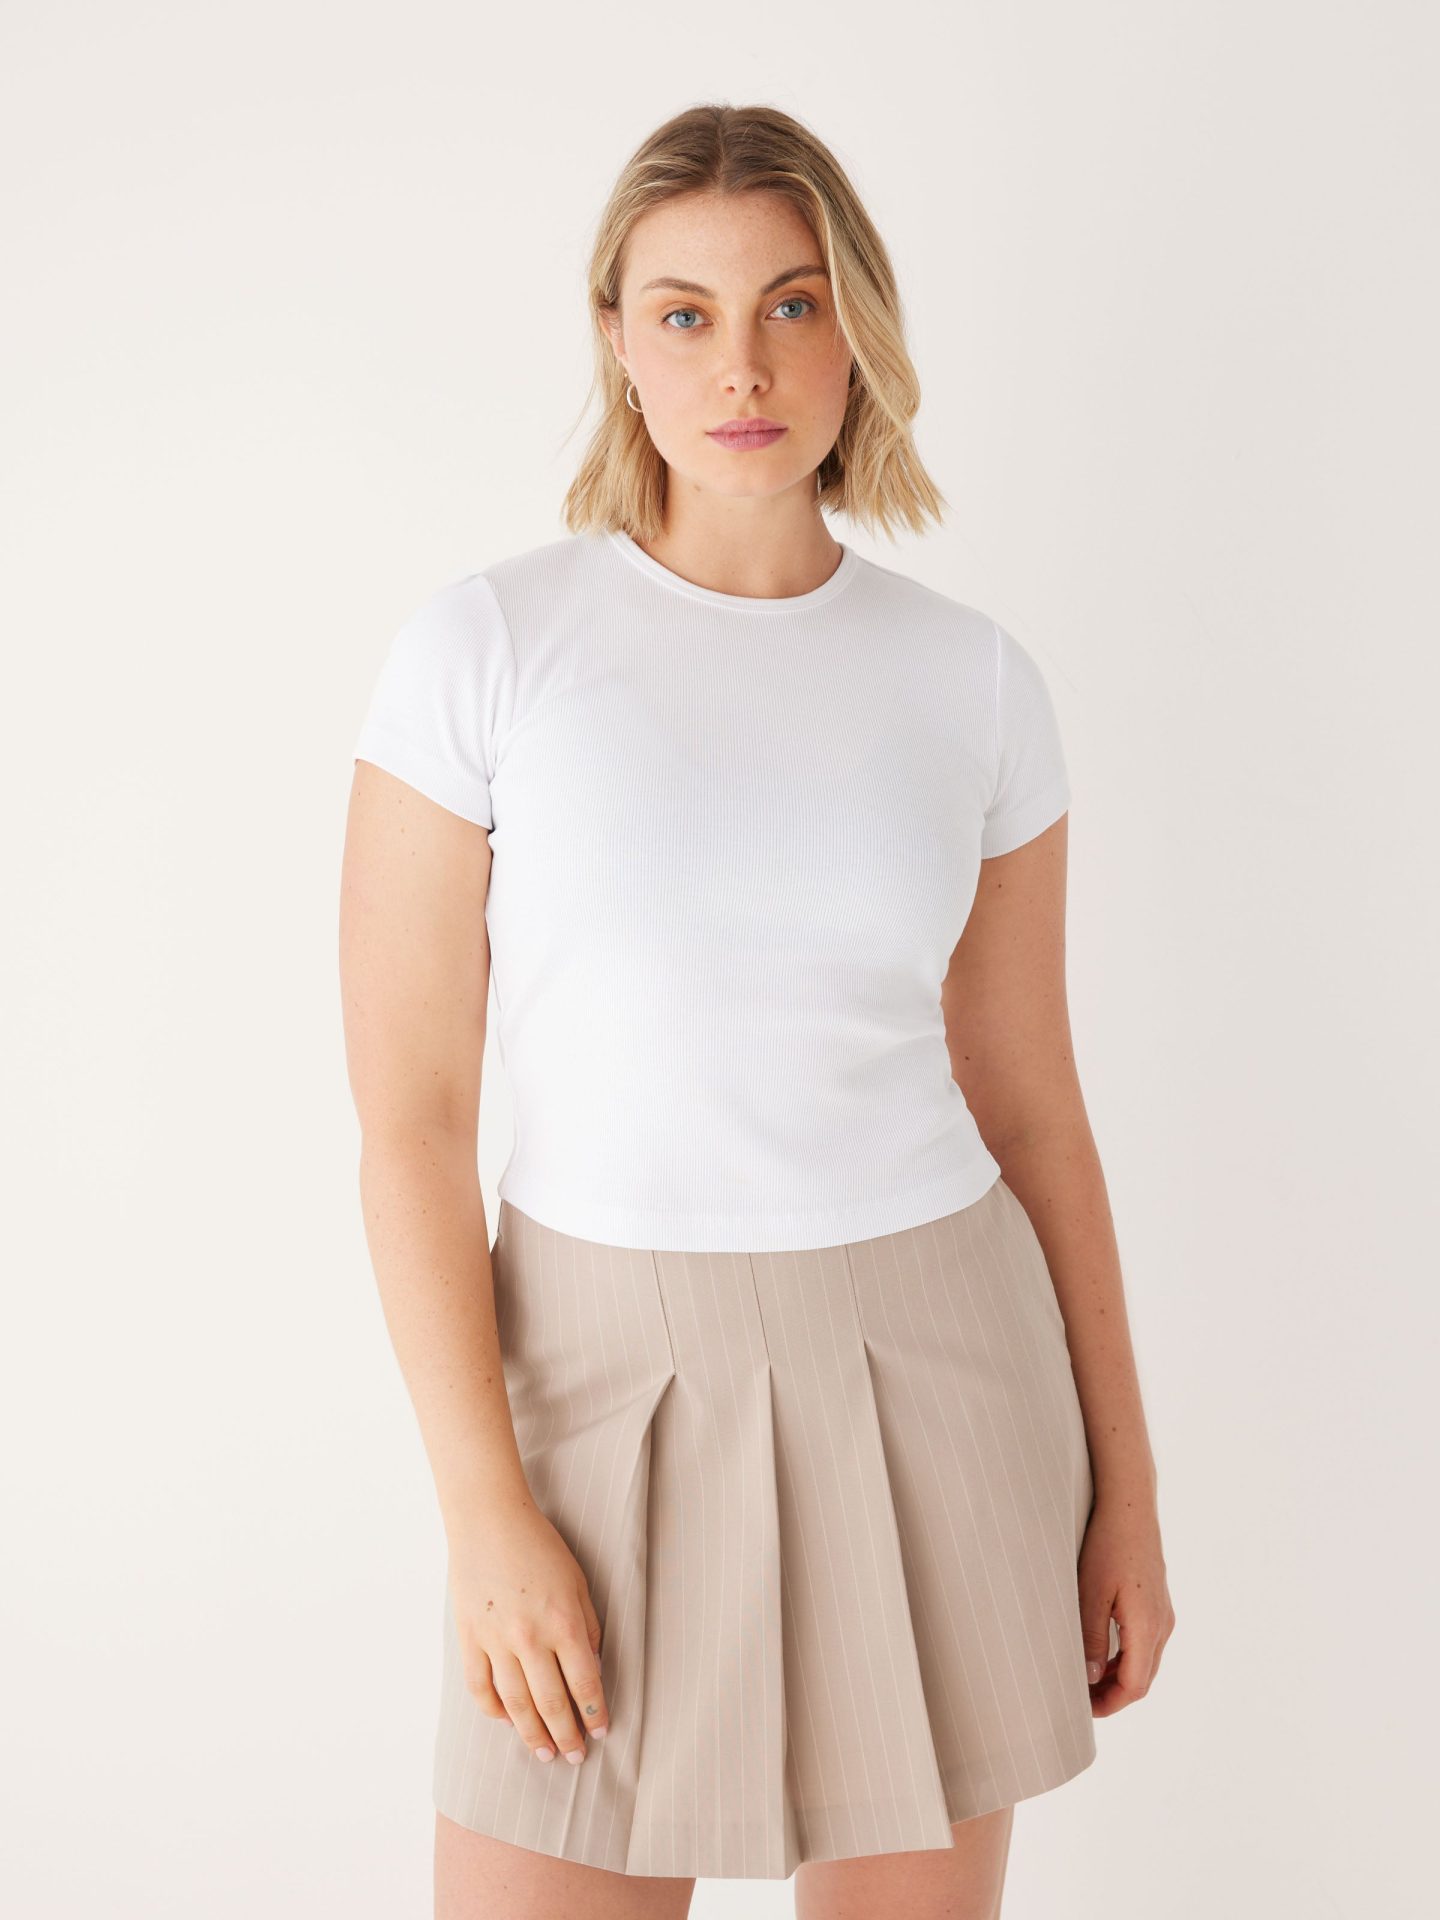 The Essential T-Shirt in Bright White – Frank And Oak USA